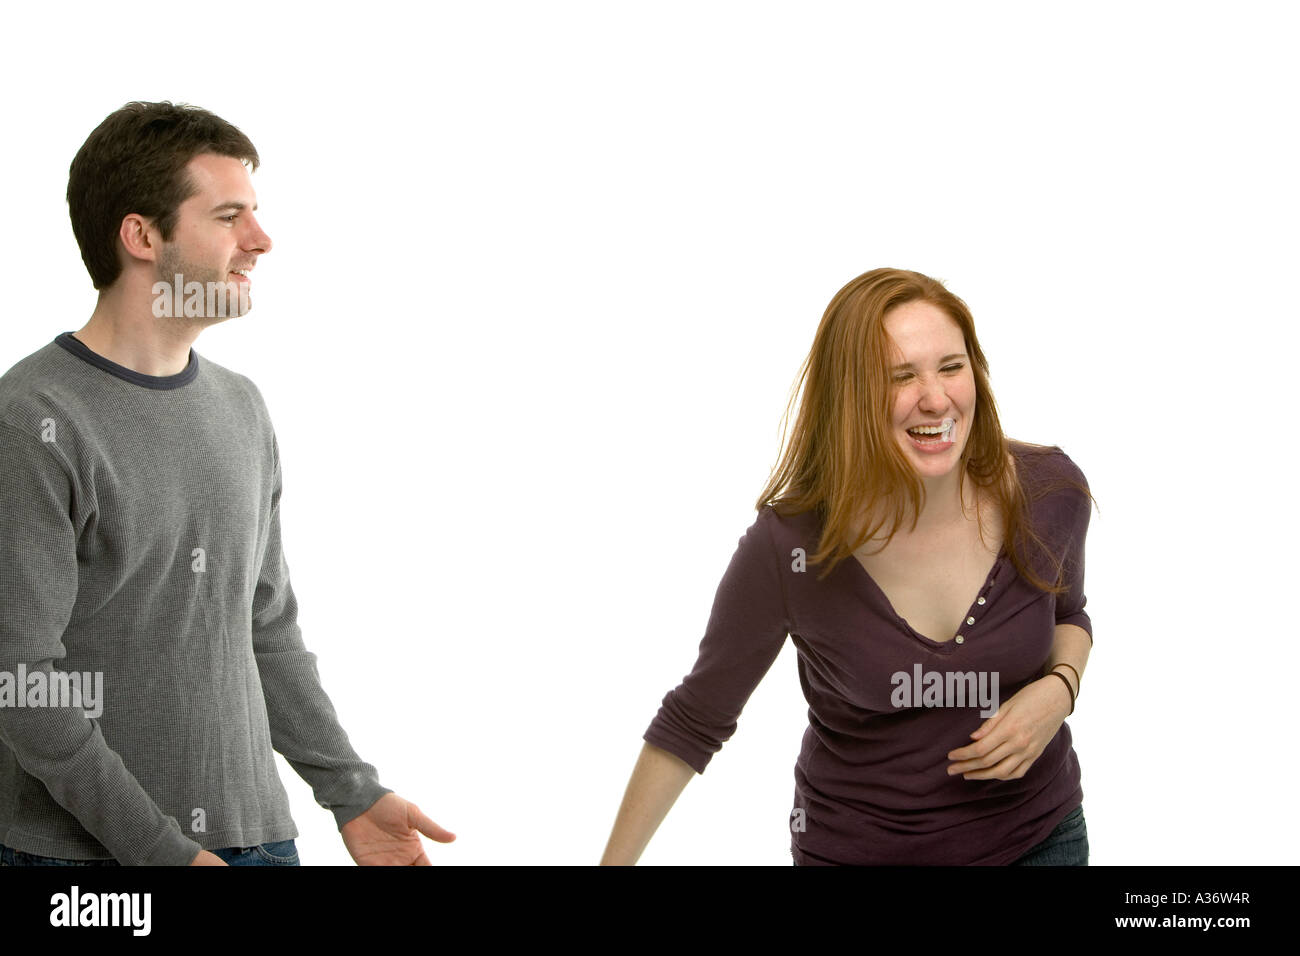 Attractive young man says something funny that makes his red haired girlfriend laugh Stock Photo